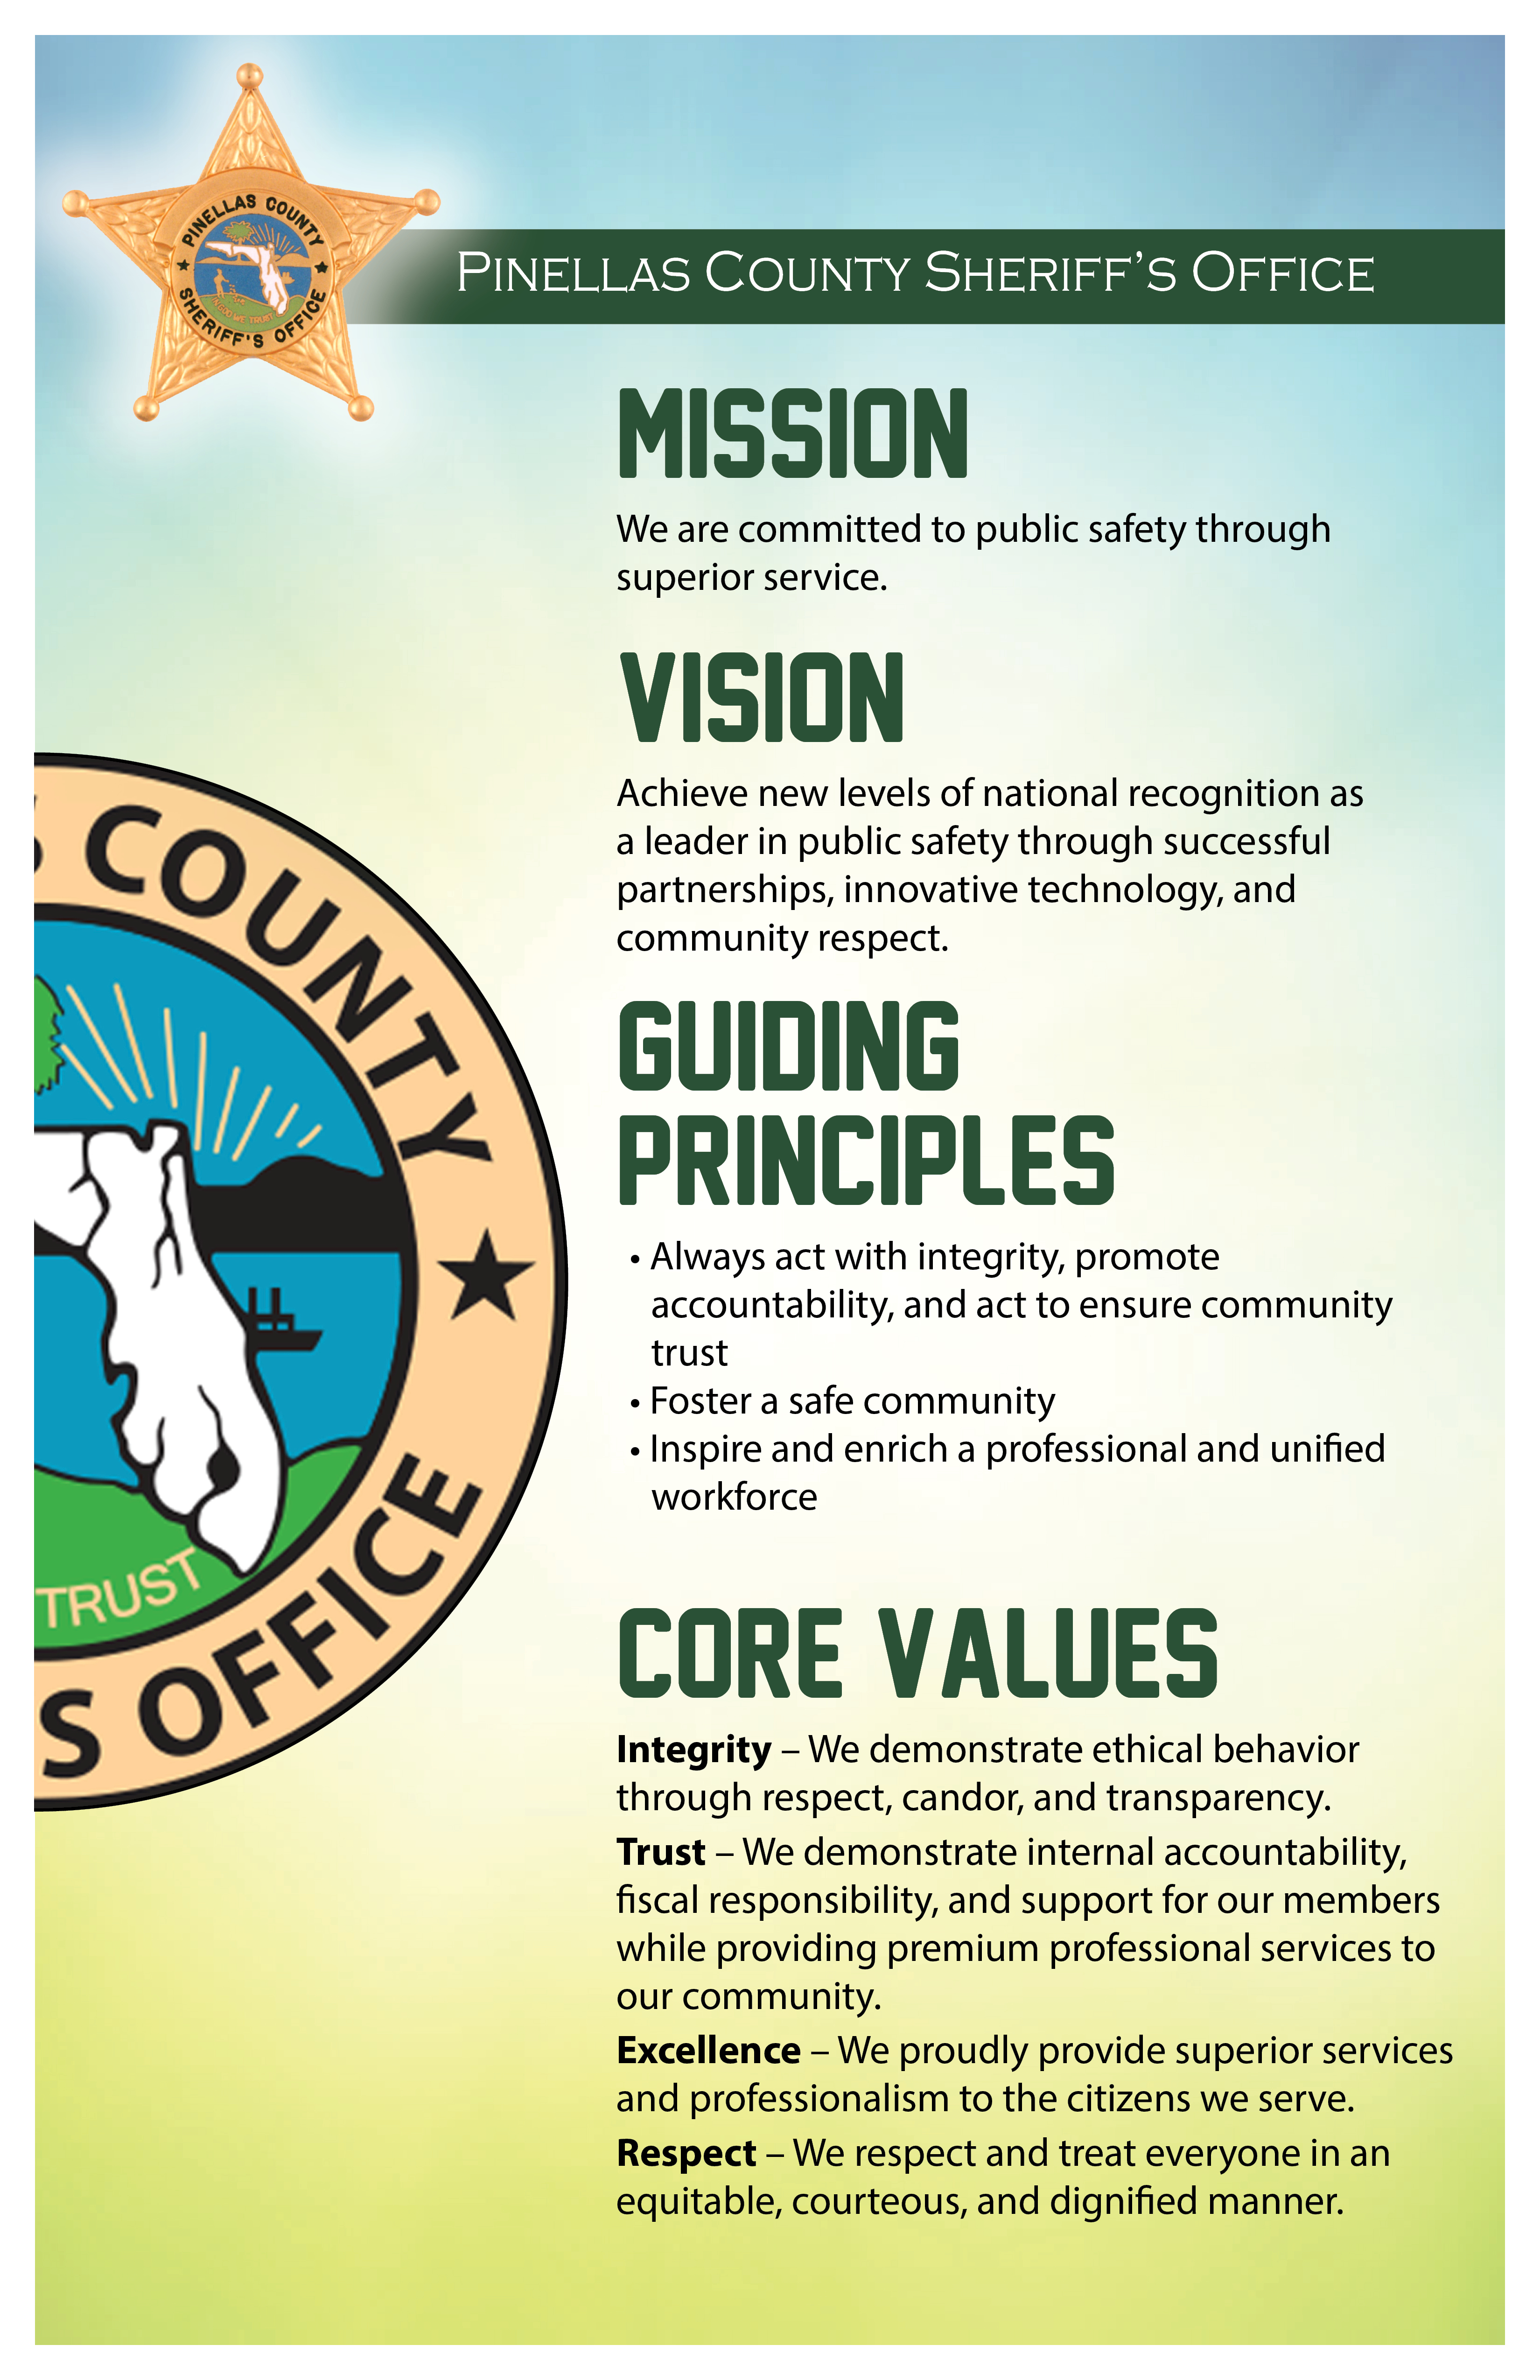 MISSION  We are committed to public safety through superior service.    VISION Achieve new levels of national recognition as a leader in public safety through successful partnerships, innovative technology, and community respect. Guiding  Principles  • Always act with integrity, promote accountability, and act to ensure community trust • Foster a safe community • Inspire and enrich a professional and unified workforce  core values Integrity – We demonstrate ethical behavior through respect, candor, and transparency. Trust – We demonstrate internal accountability, fiscal responsibility, and support for our members while providing premium professional services to our community. Excellence – We proudly provide superior services and professionalism to the citizens we serve. Respect – We respect and treat everyone in an equitable, courteous, and dignified manner.